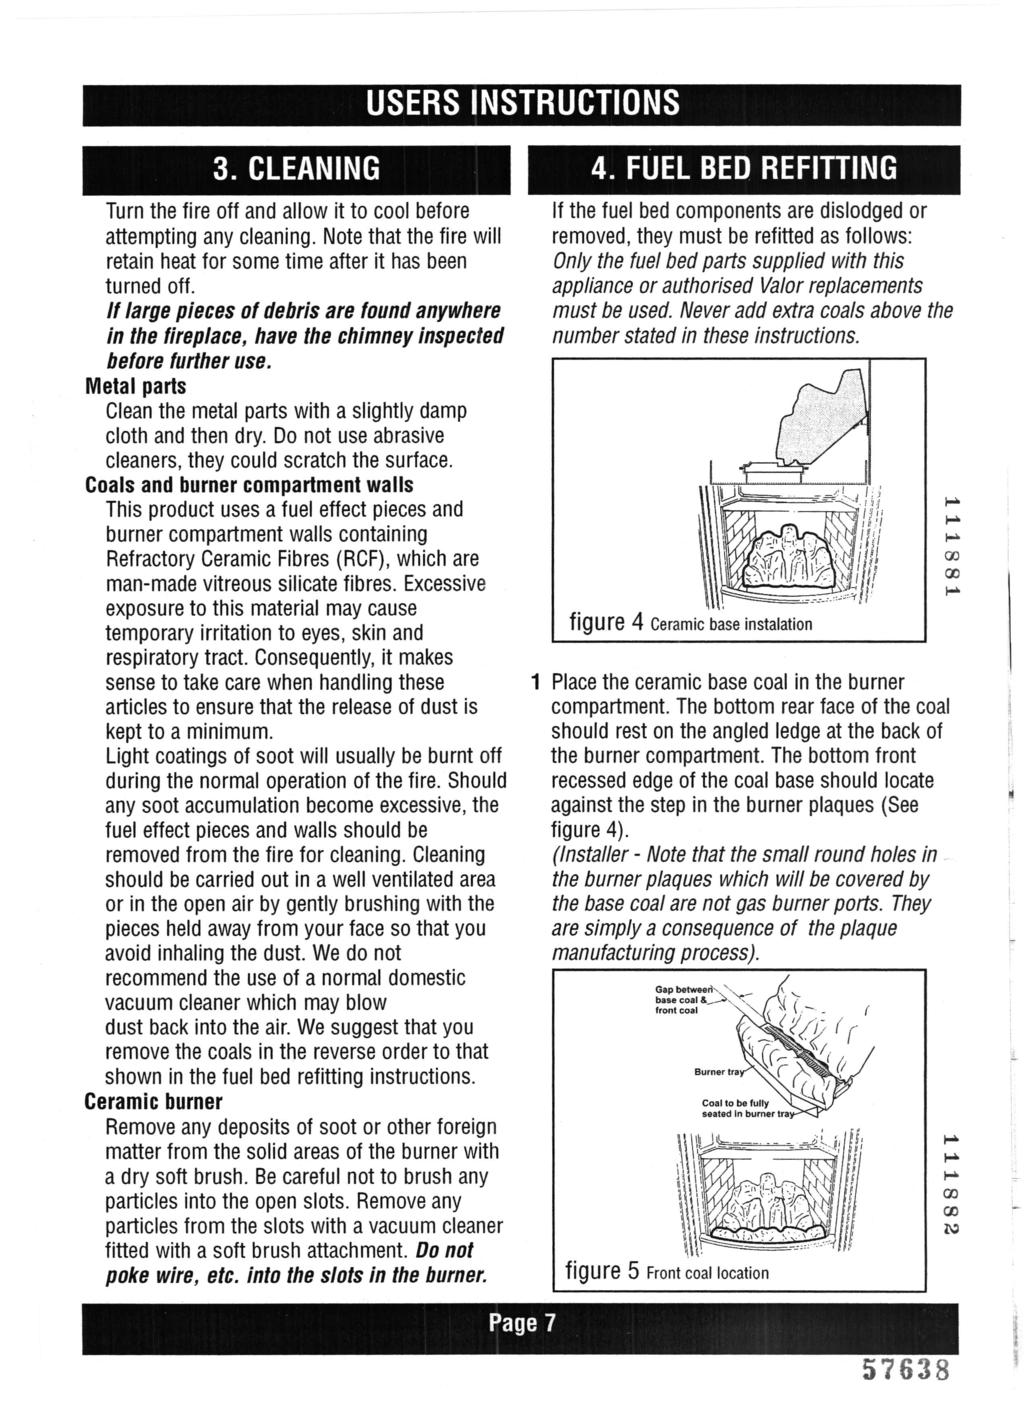 USERS INSTRUCTIONS 3. CLEANING Turn the fire off and allow it to cool before attempting any cleaning. Note that the fire will retain heat for some time after it has been turned off.